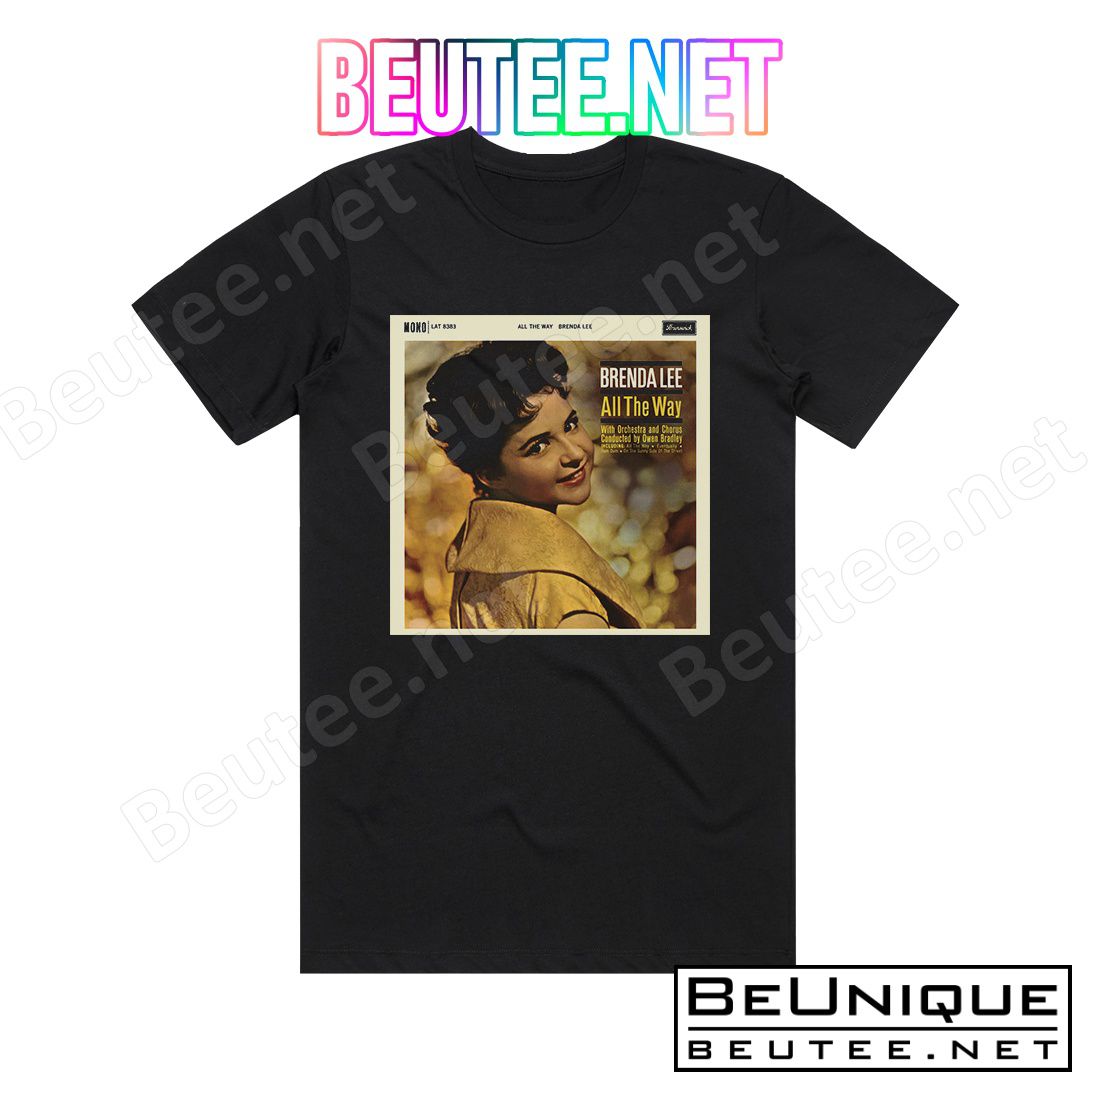 Brenda Lee All The Way Album Cover T-Shirt